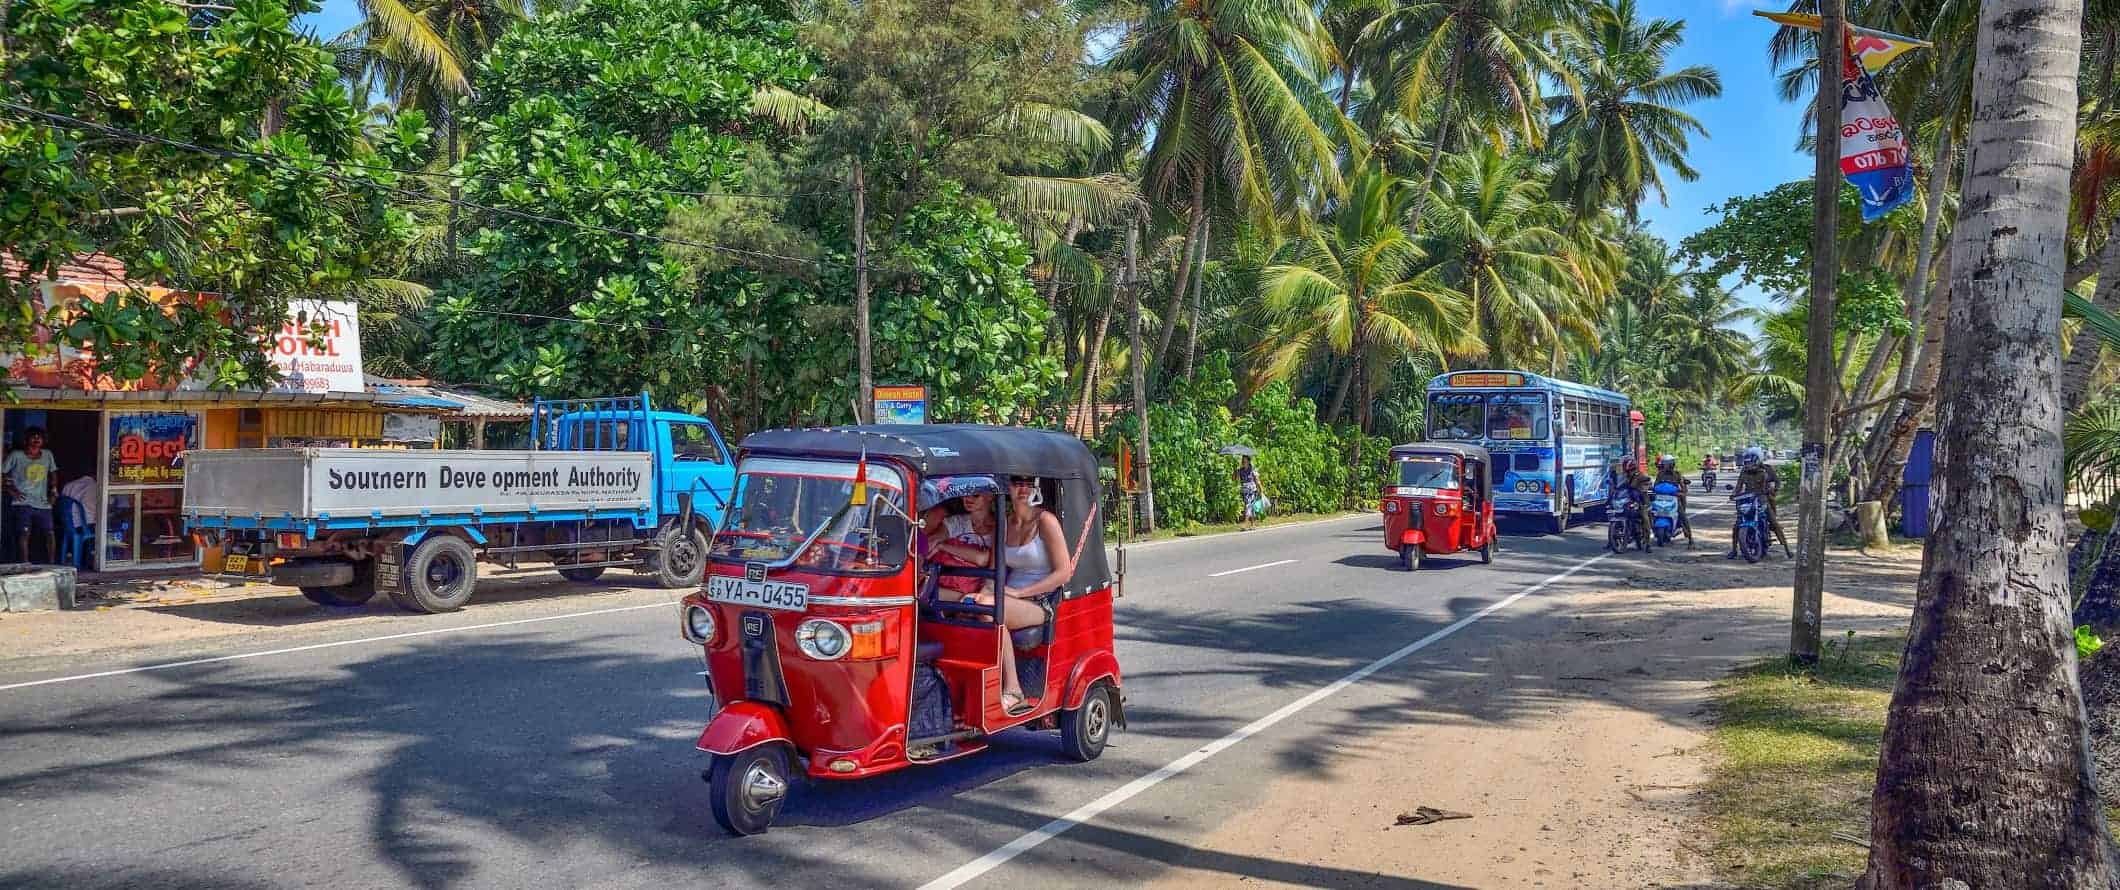 Tuk tuks and buses on a road lined with palm trees in Sri Lanka